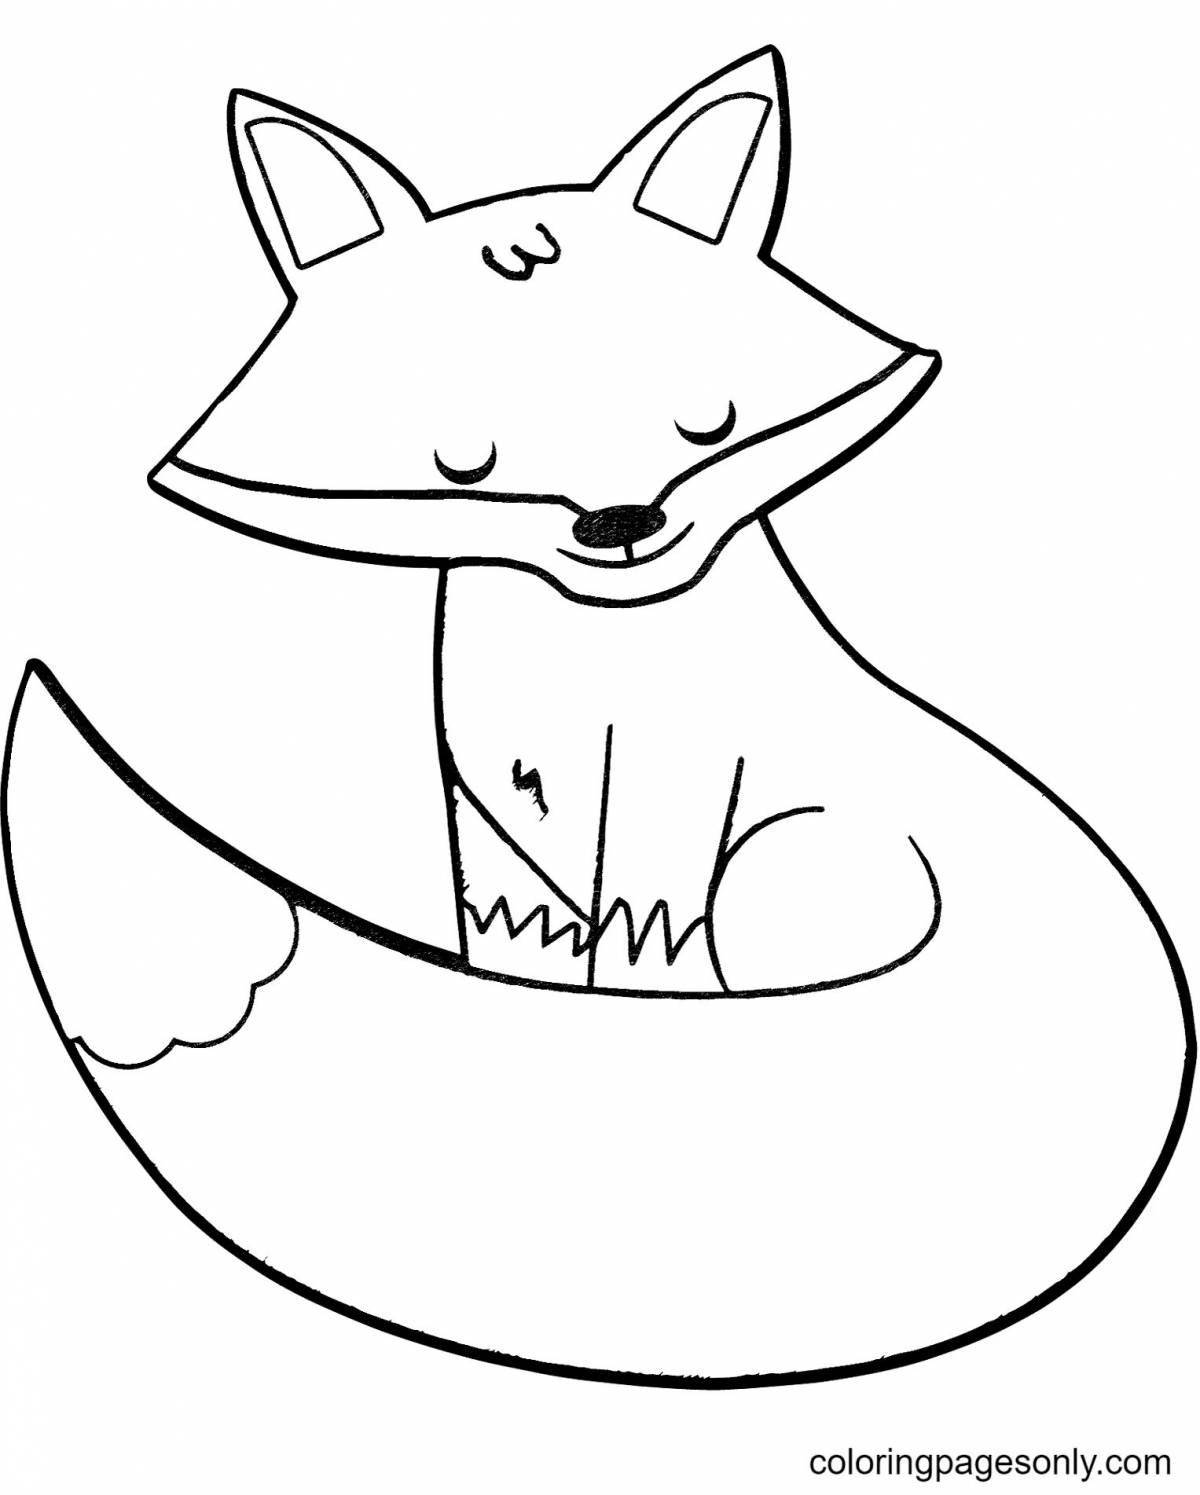 Violent fox coloring for children 2-3 years old